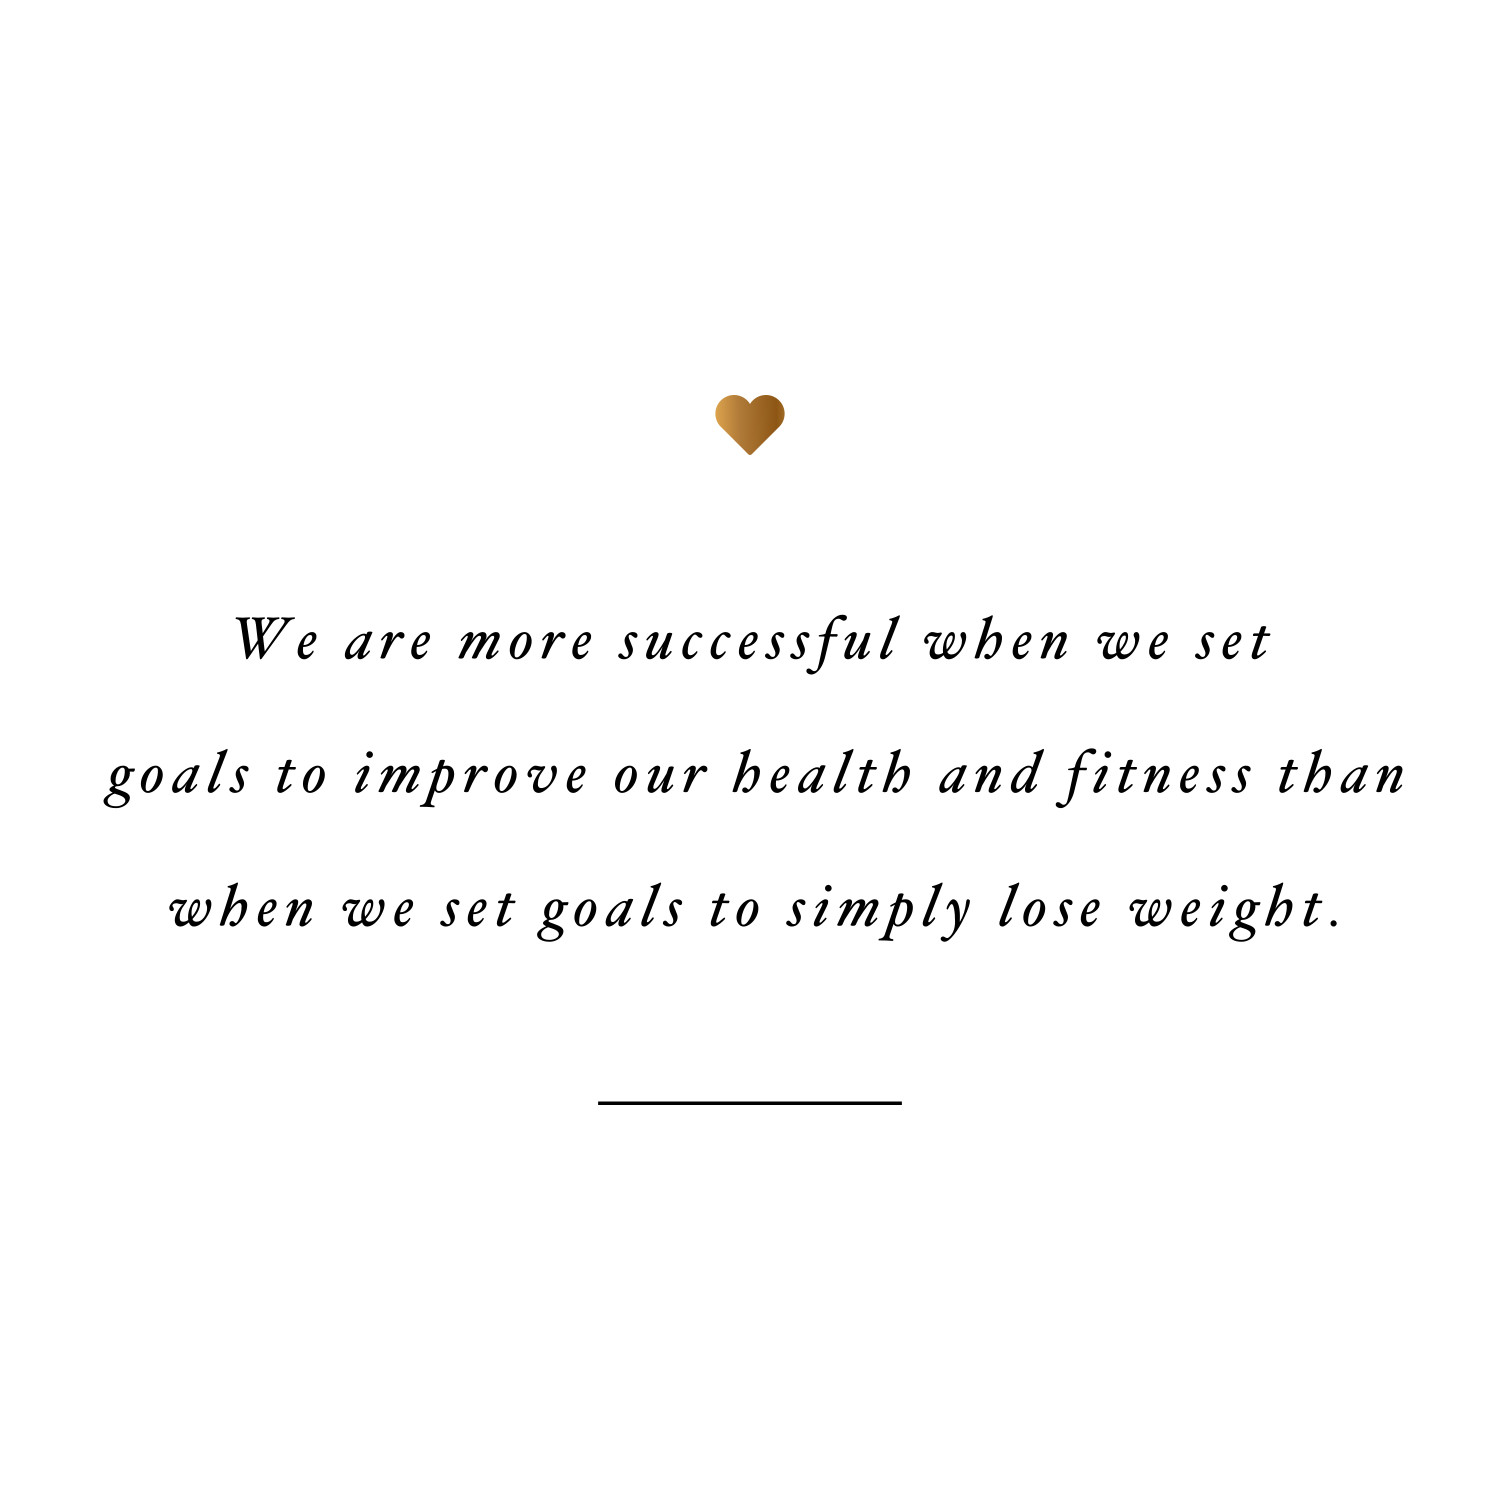 Set smart goals! Browse our collection of inspirational wellness and fitness quotes and get instant training and weight loss motivation. Stay focused and get fit, healthy and happy! https://www.spotebi.com/workout-motivation/set-smart-goals/